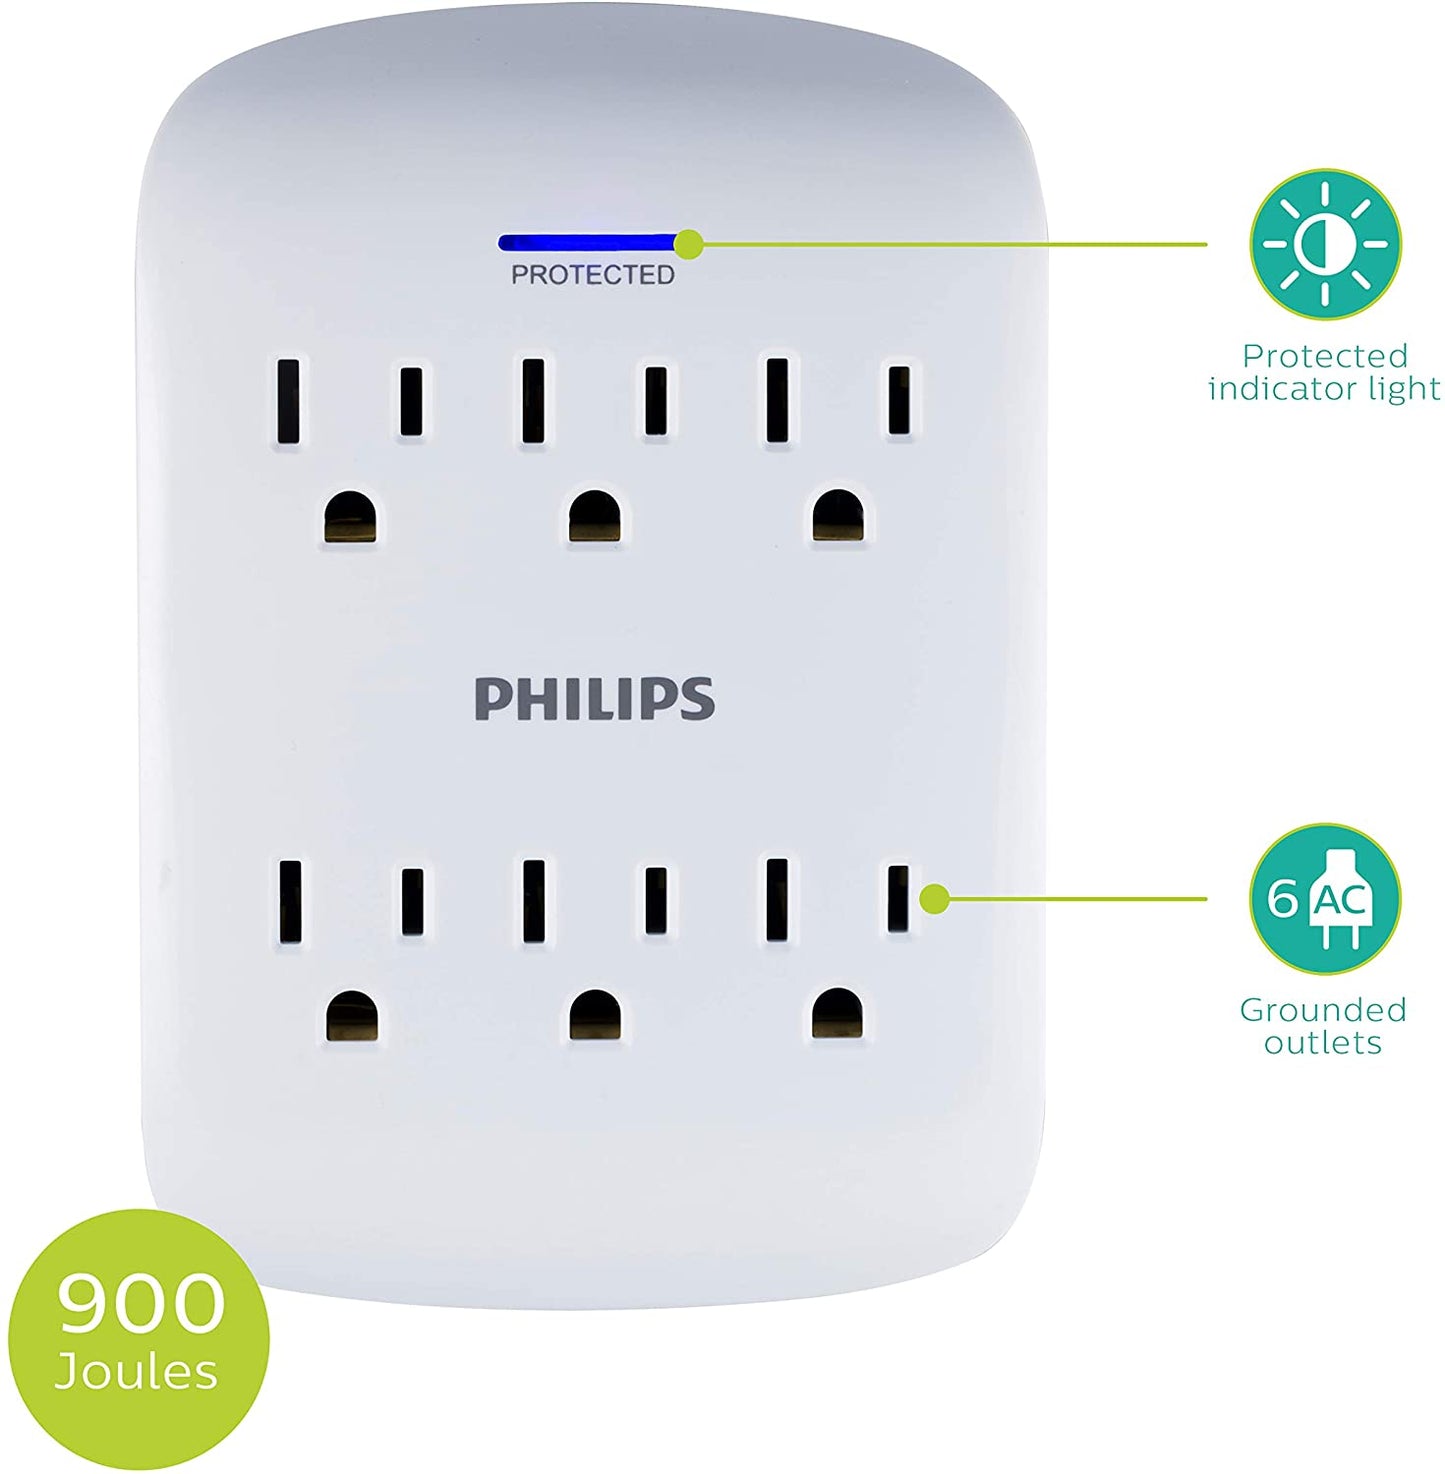 Philips power outlet overload protection 